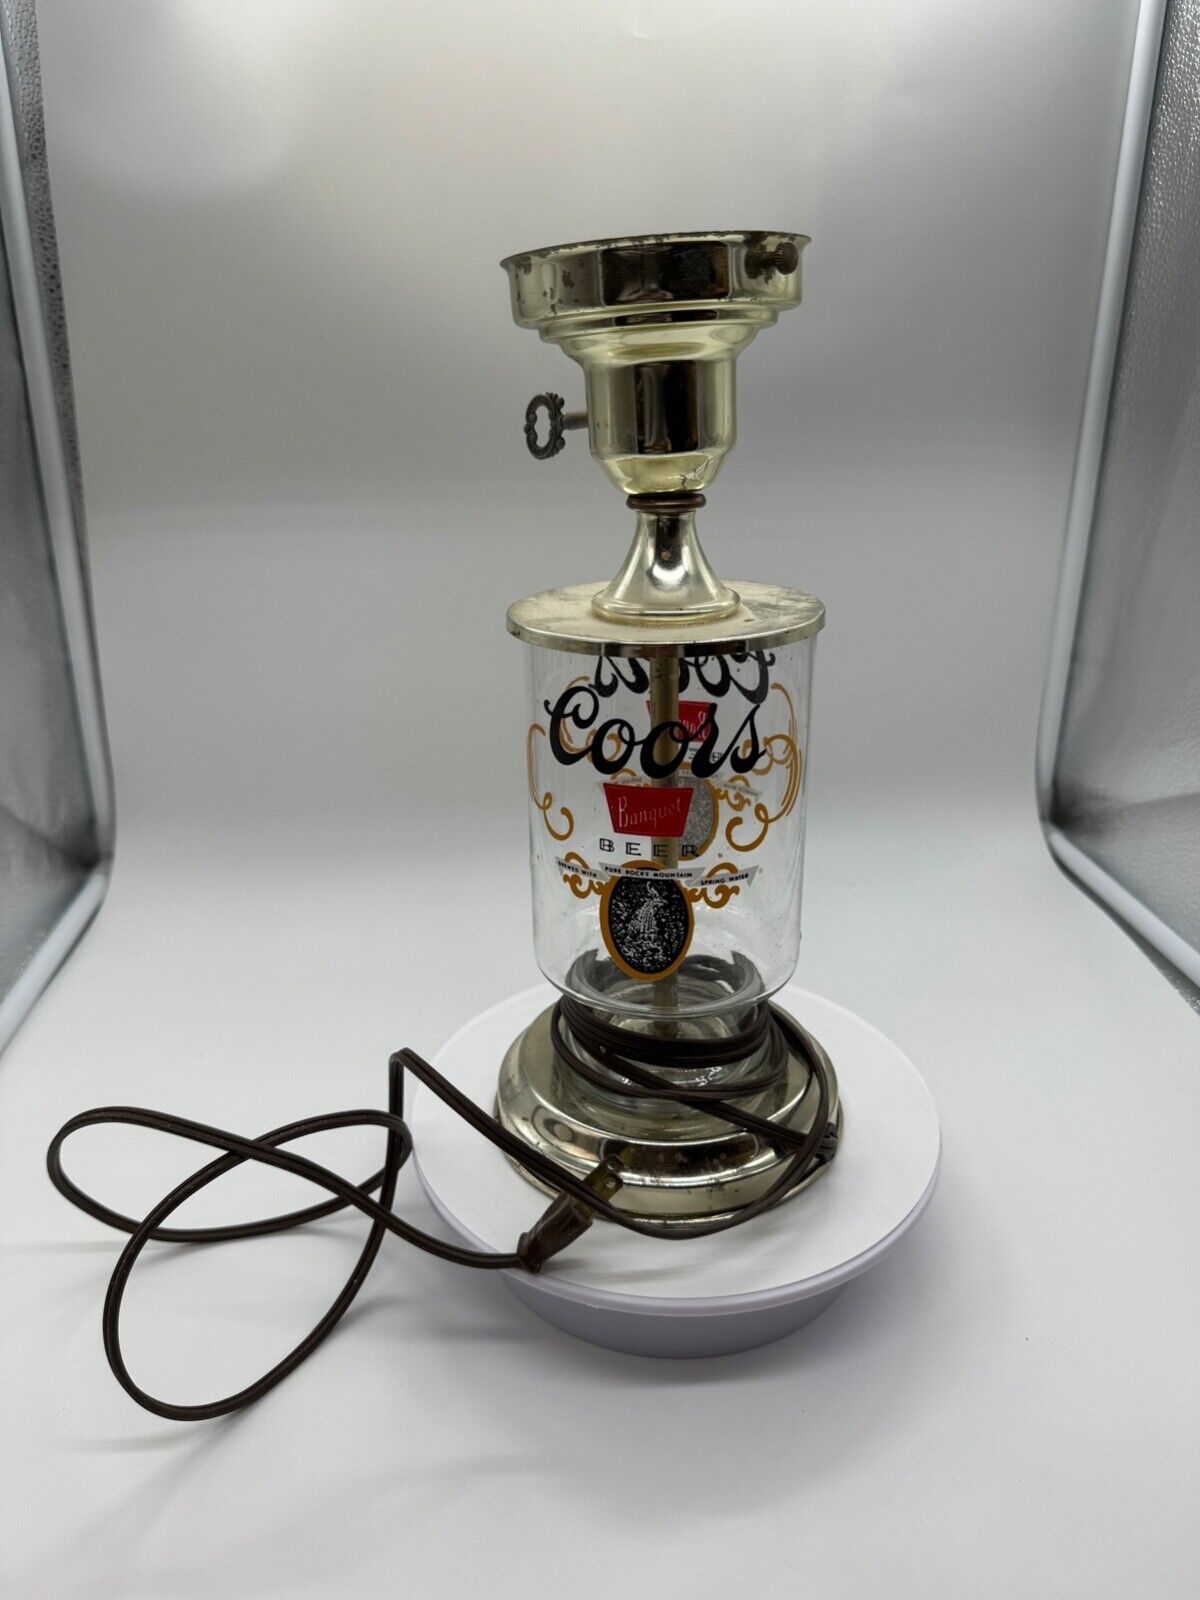 Coors Vintage Table Lamp For Repair Only - 